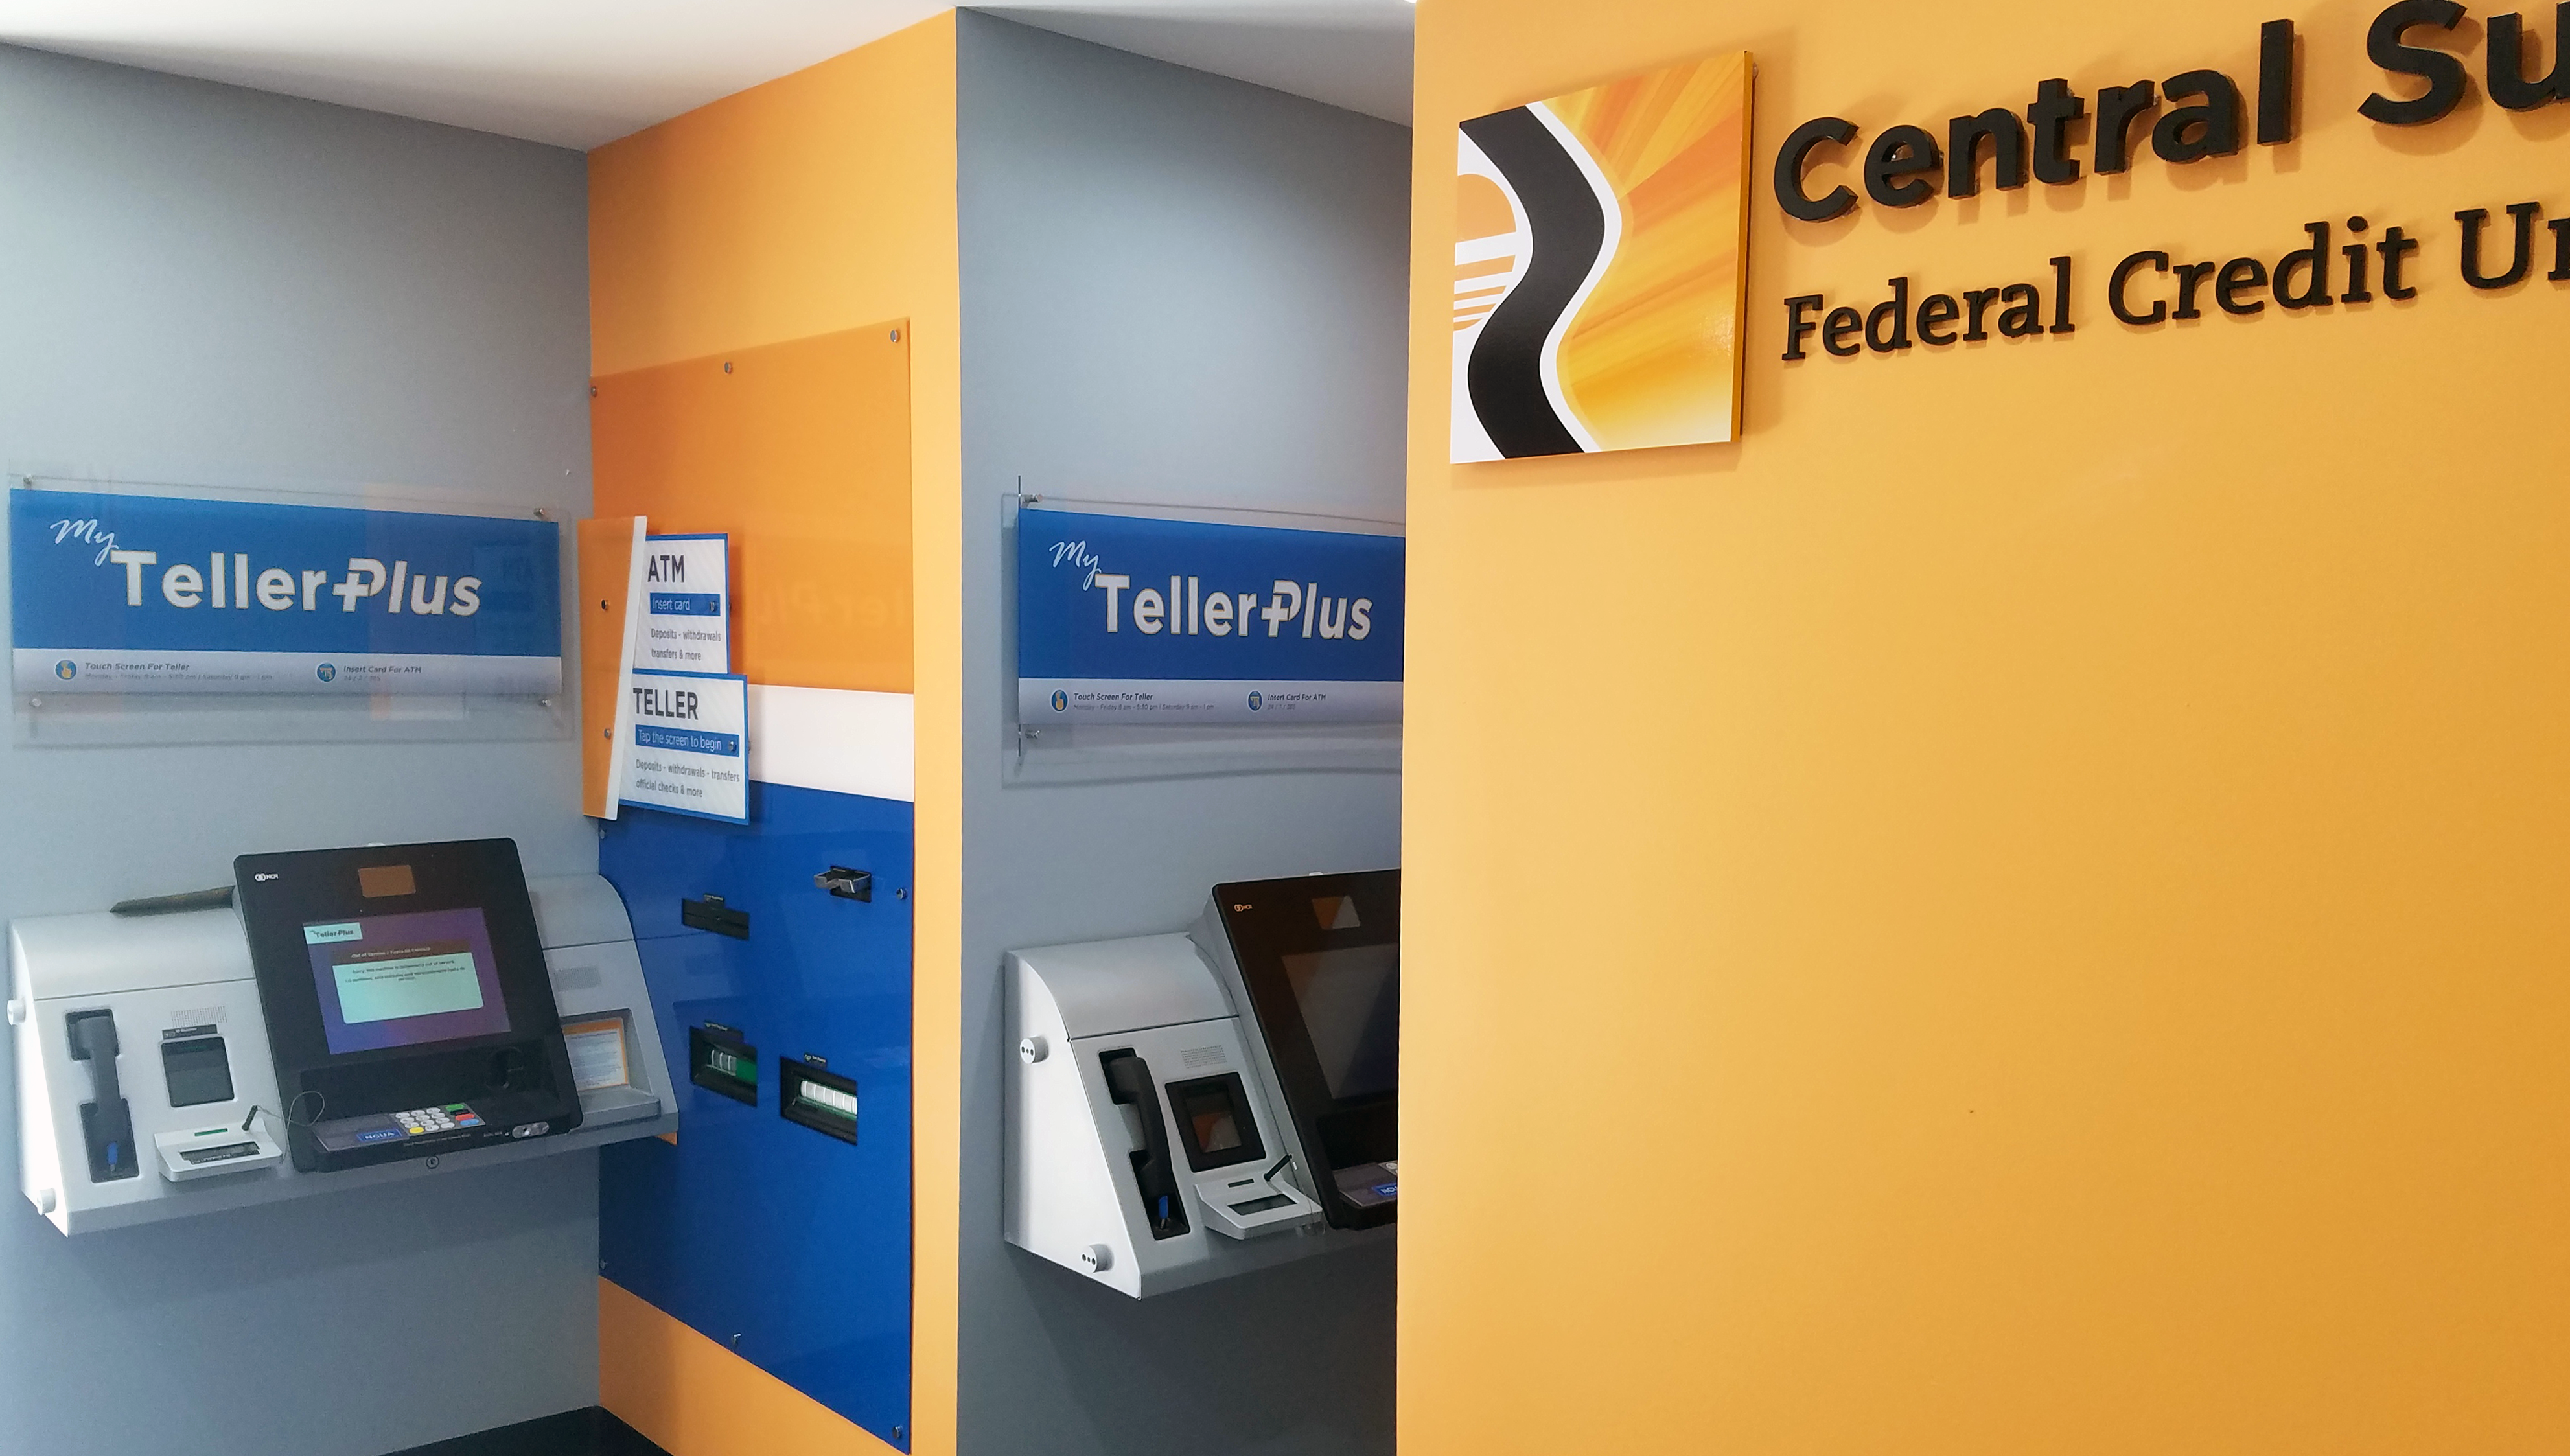 Deposit cash and checks 24 hours a day at any Central Sunbelt branch ATM or My Teller Plus!